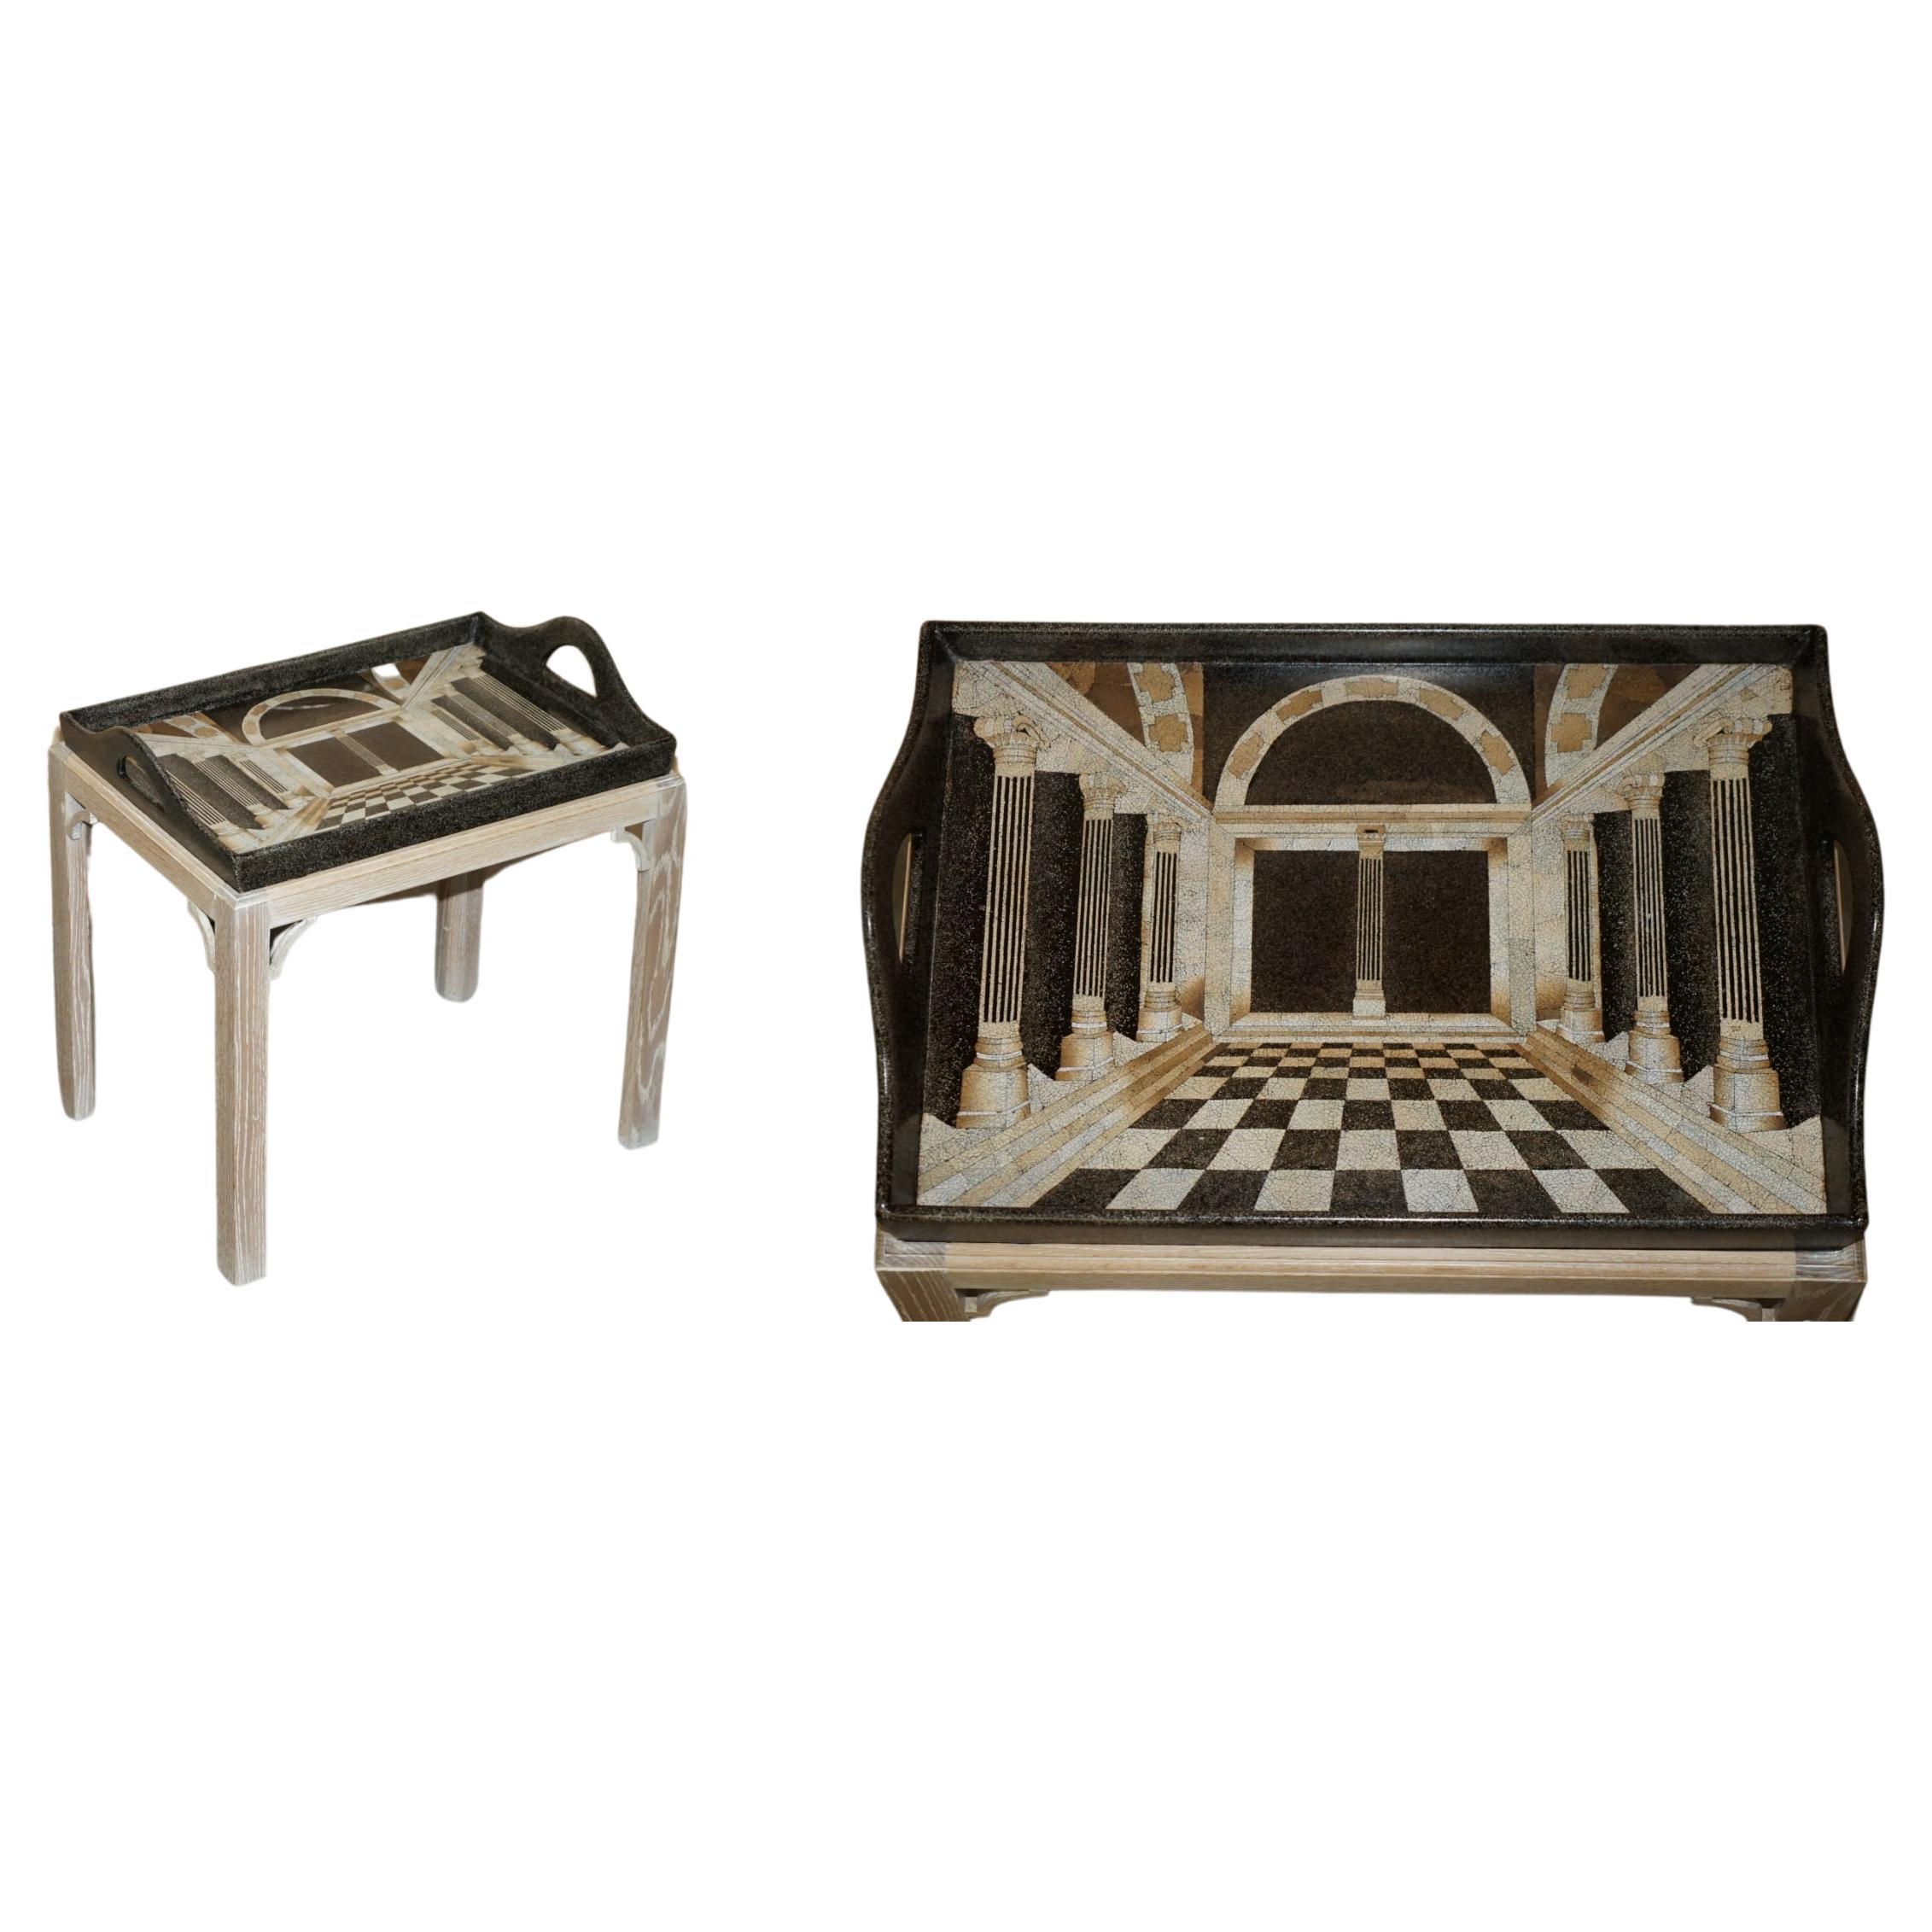 DAVID LINLEY PERSPECTIVE TRAY TABLE WiTH ITALIAN MOSAIC TILE STYLE FINISH For Sale